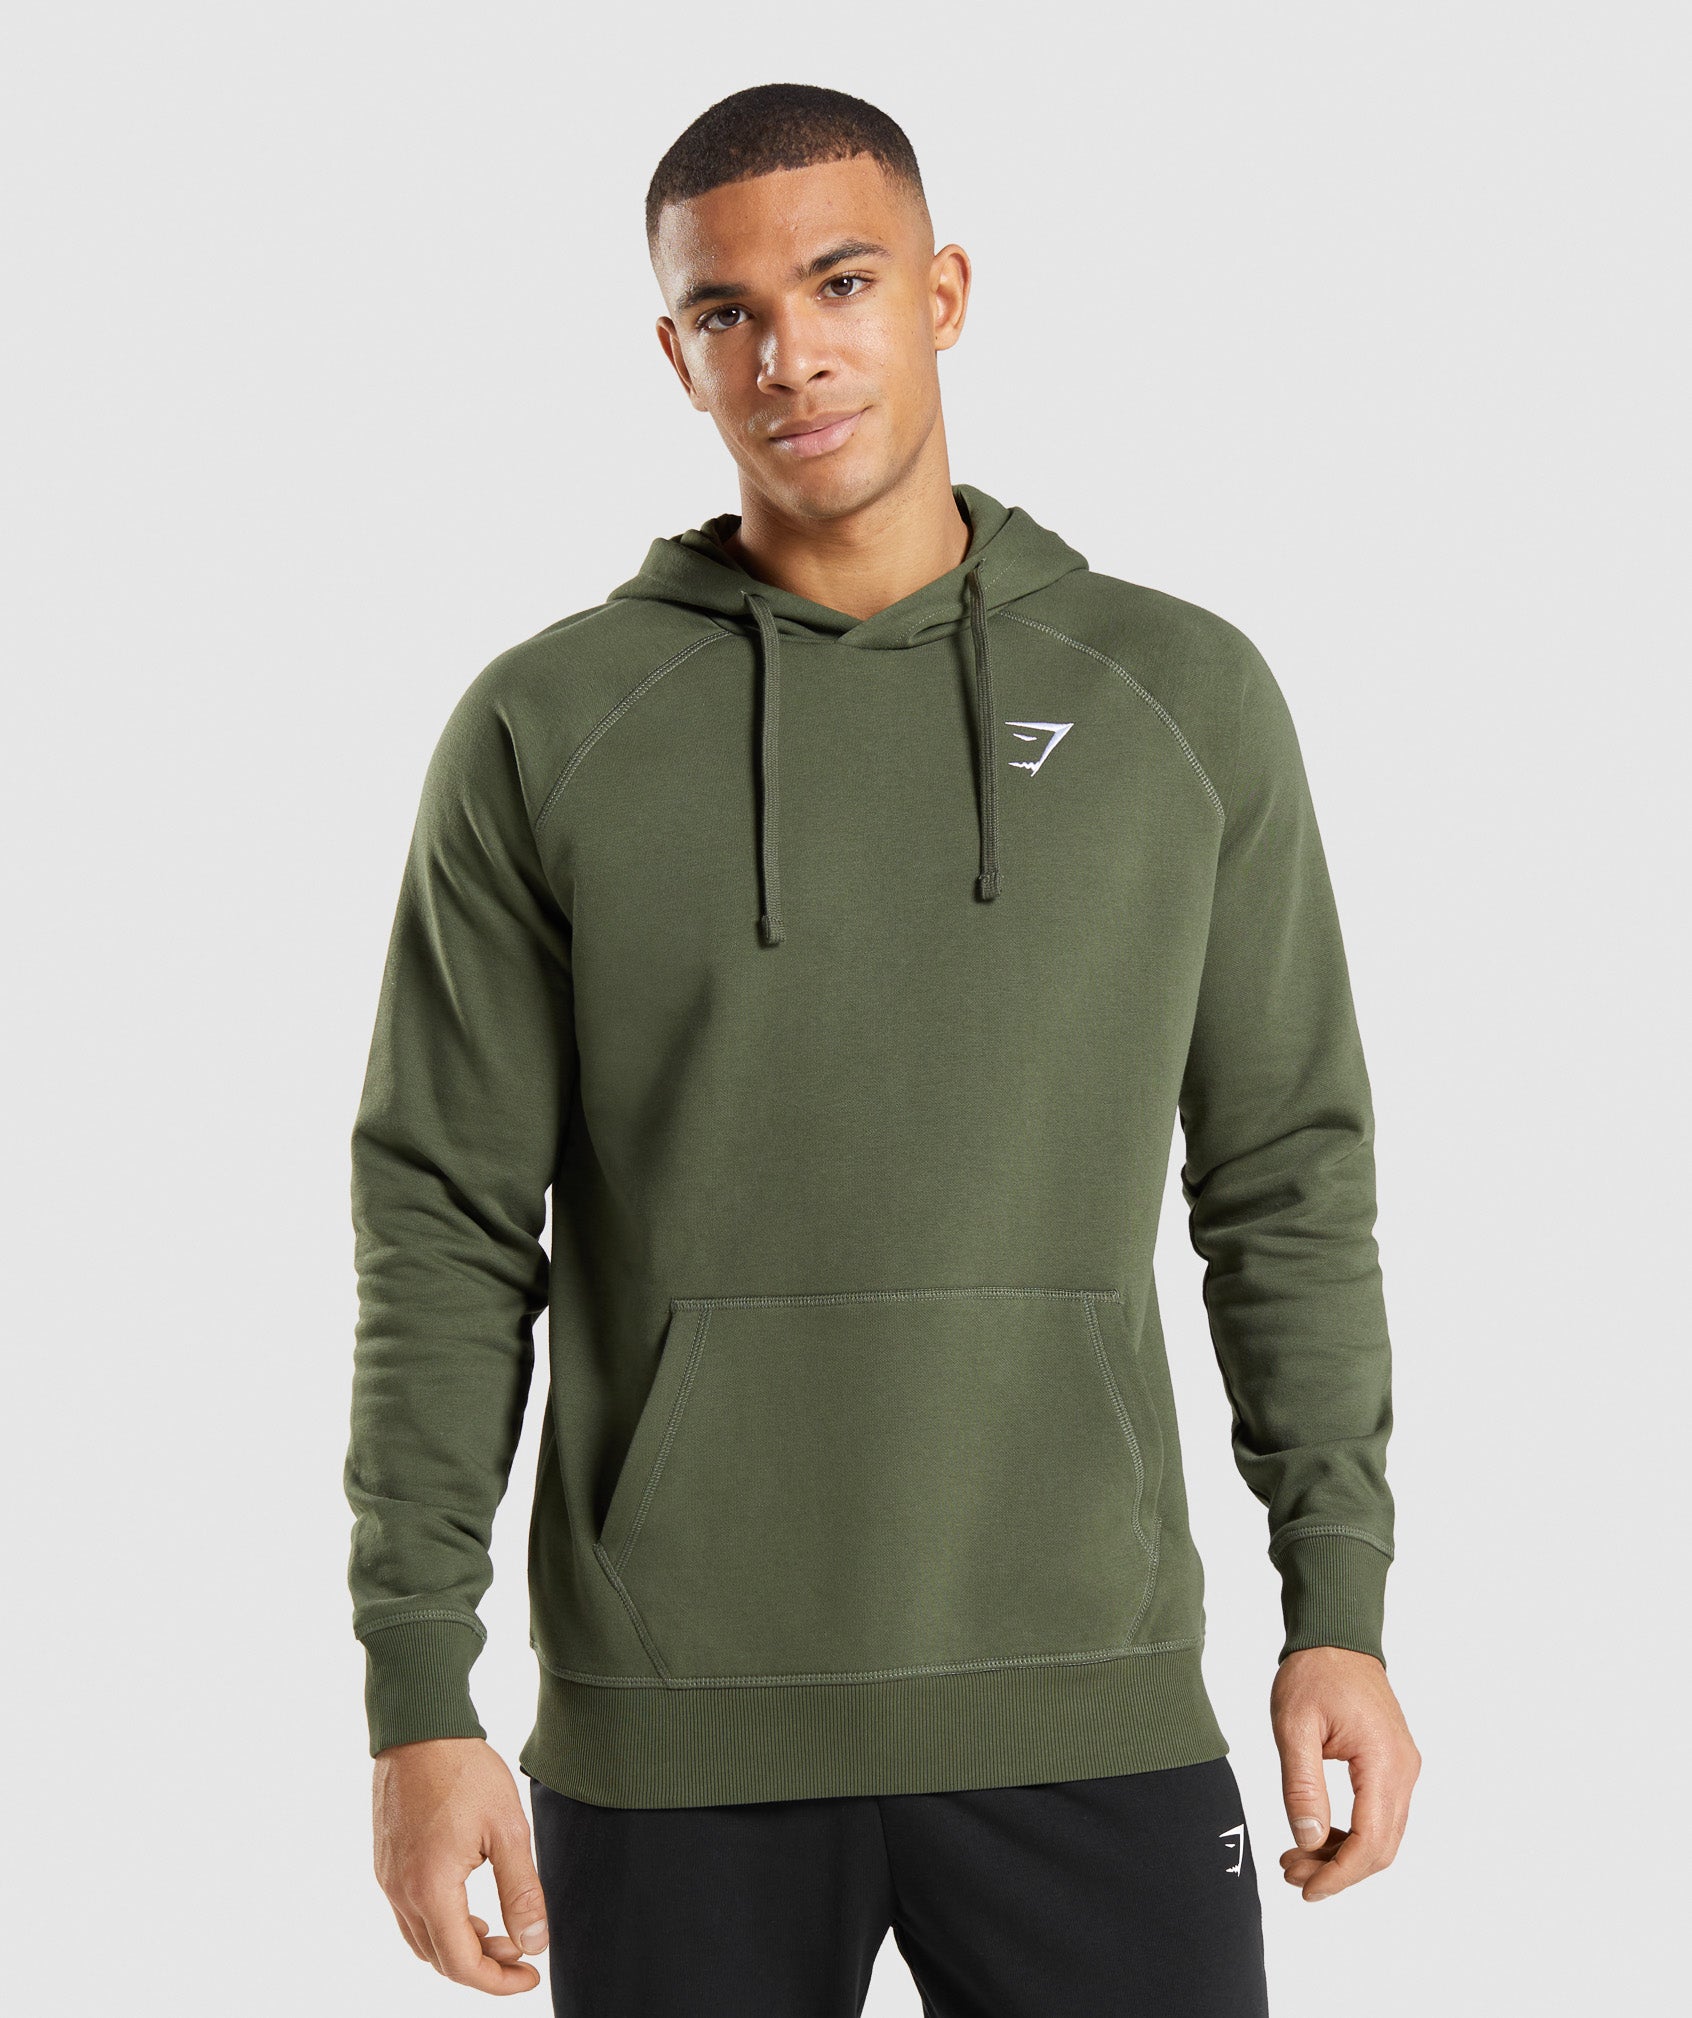 Crest Hoodie in Core Olive - view 1